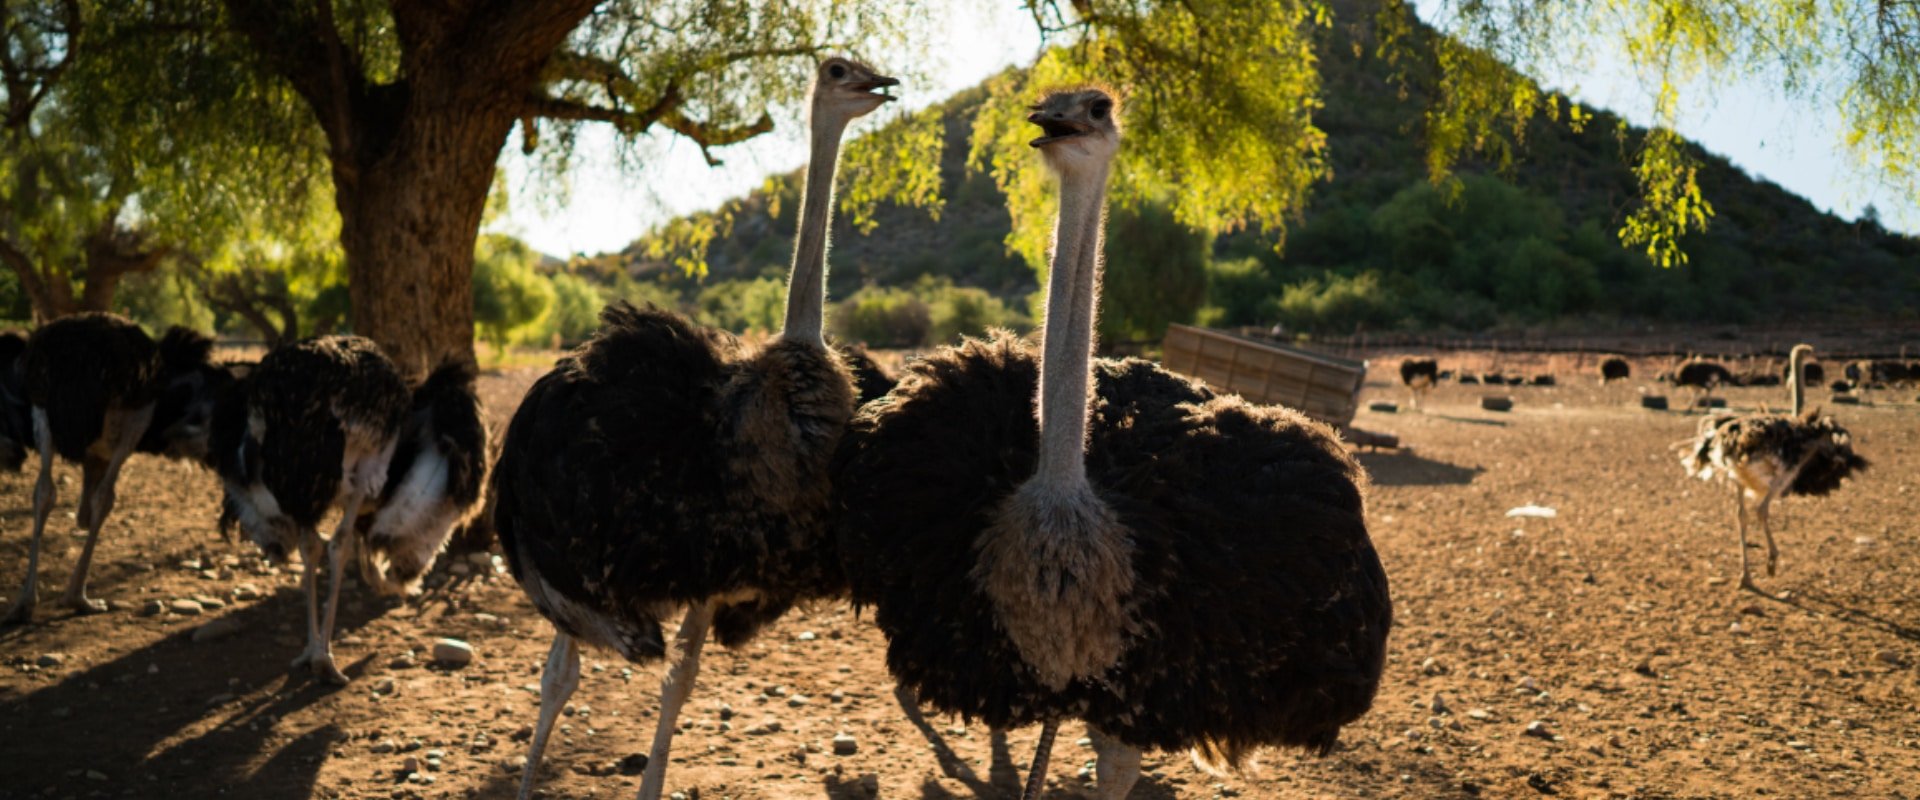 Acquaint yourself with the world’s biggest bird